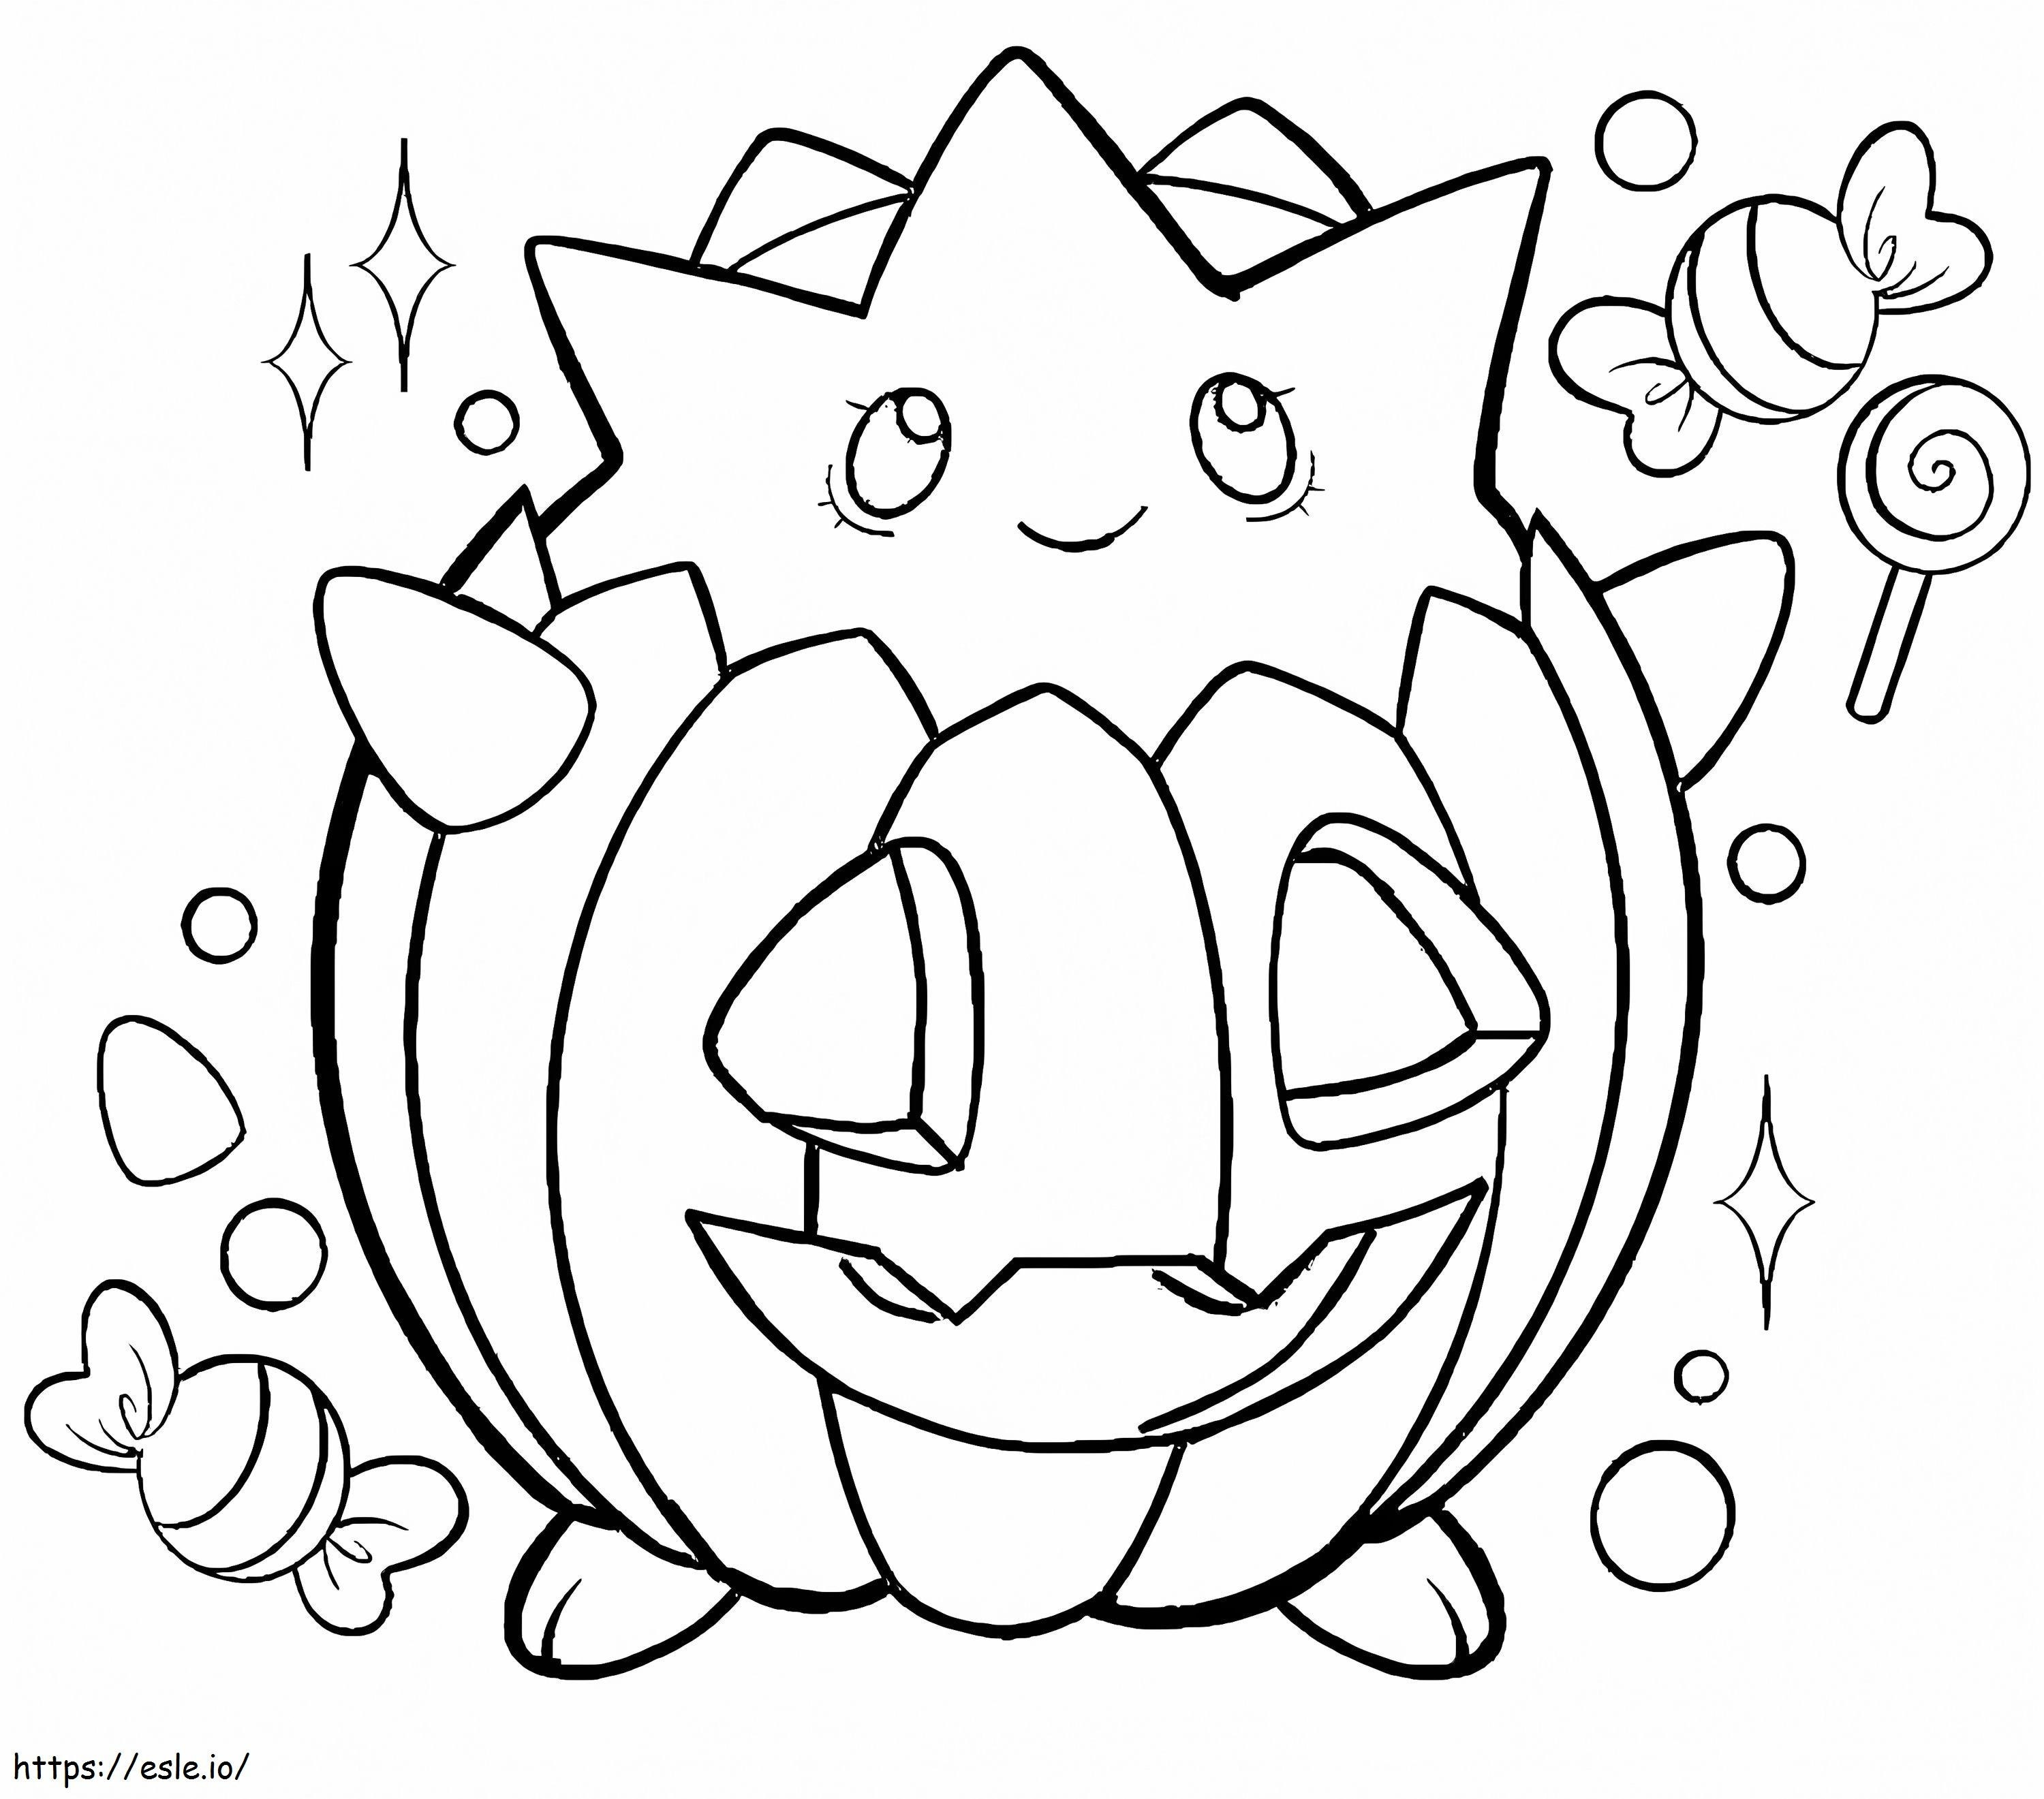 Togepi Pokemon On Halloween coloring page